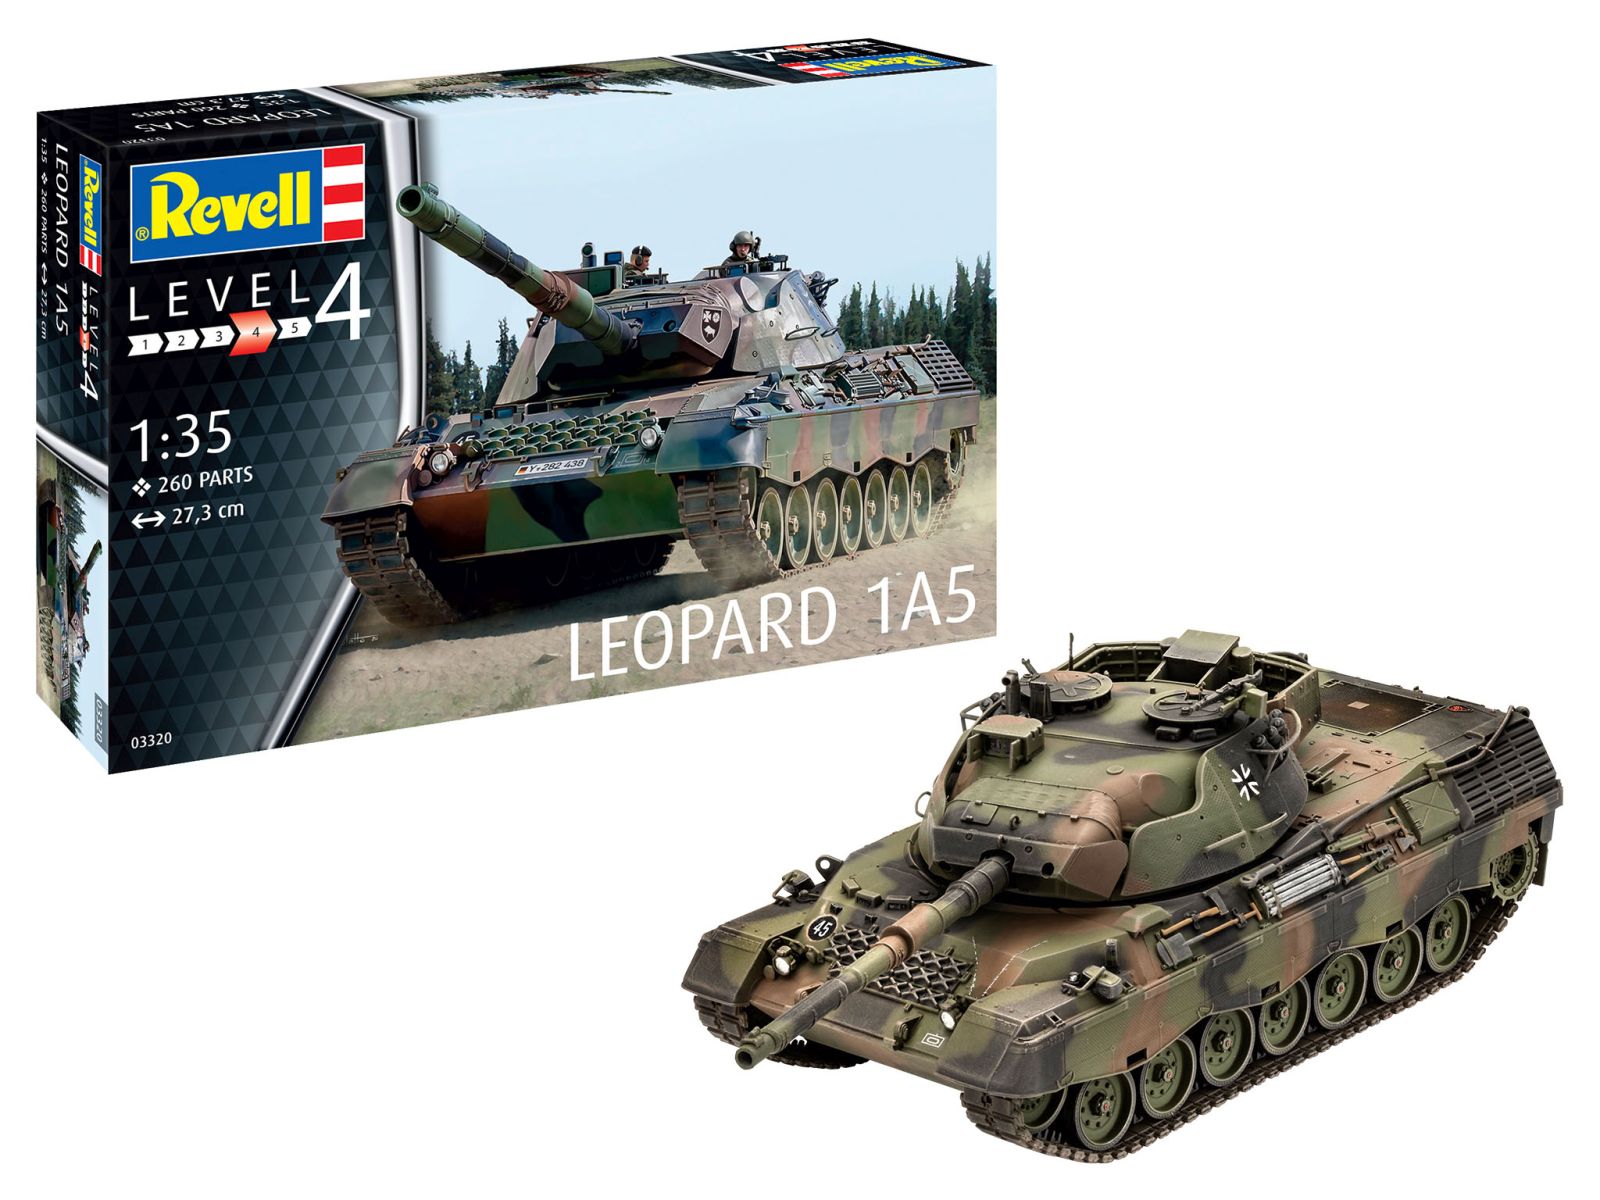 Revell 03320 - Leopard 1A5